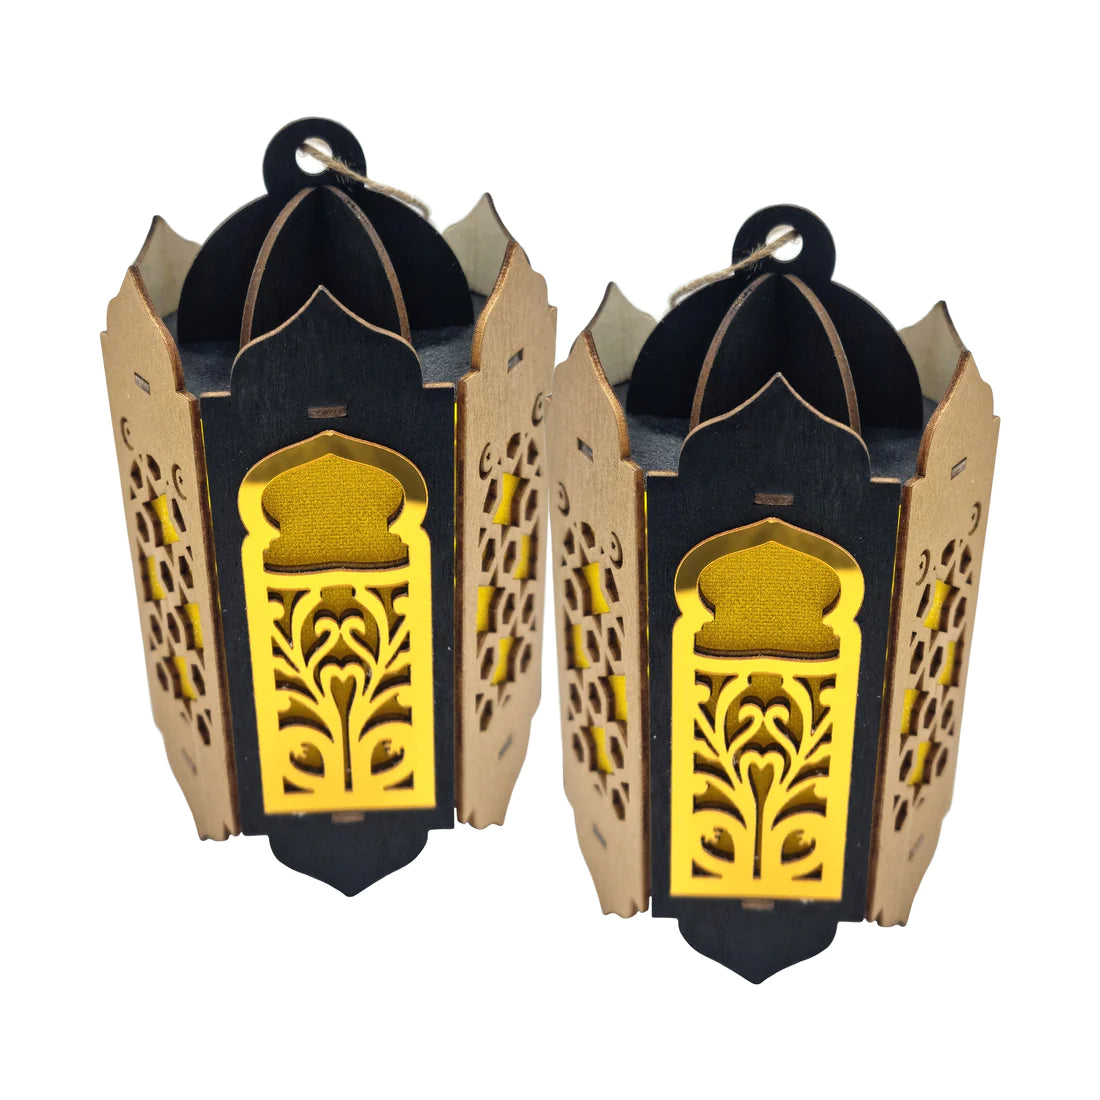 Pack of 2 Wooden Shabby Chic Table / Hanging Lantern Decoration - Black / Gold Floral Cut Out